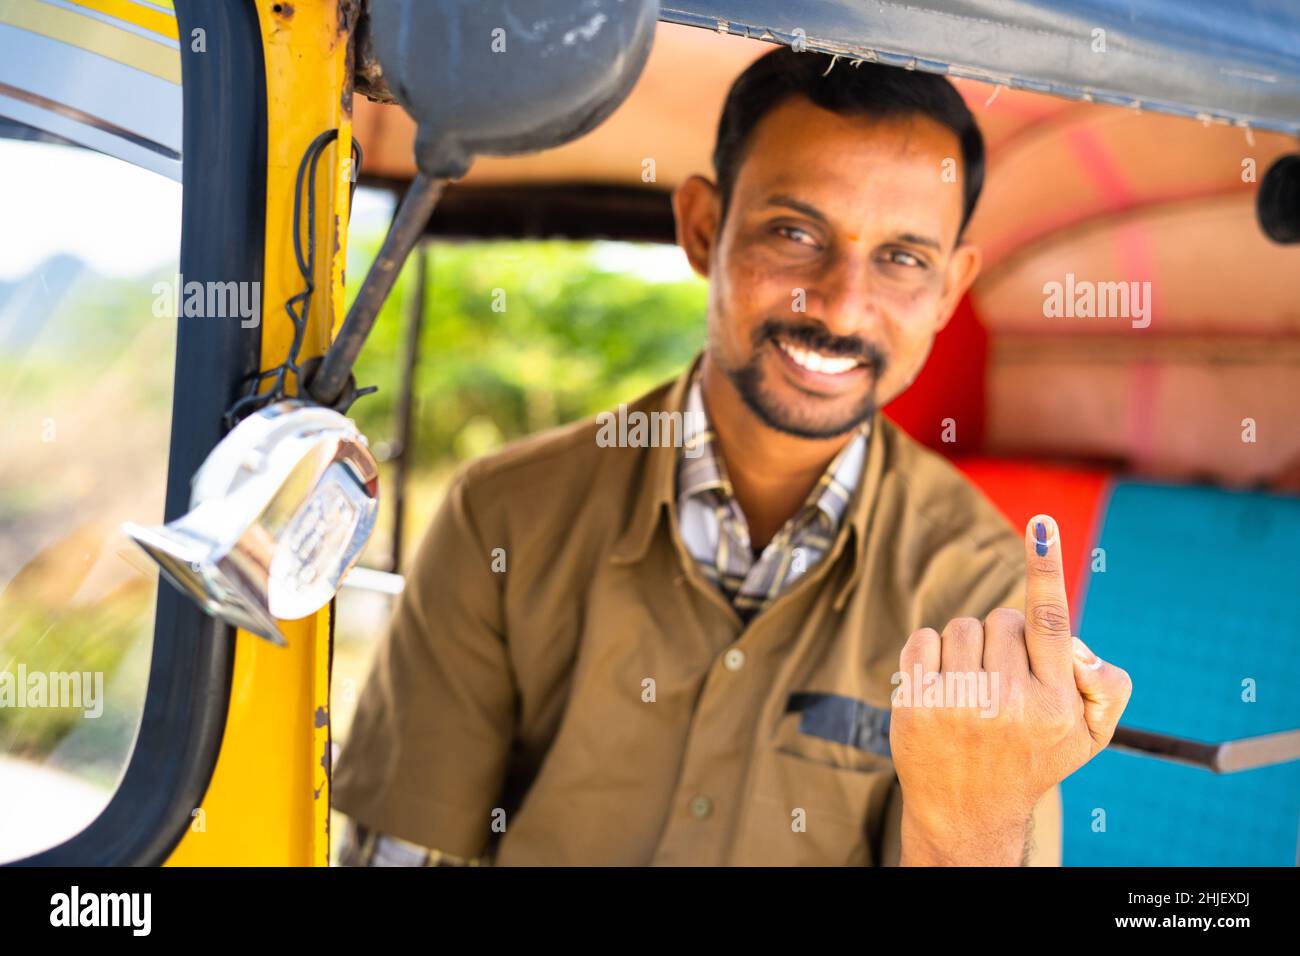 Focus on Finger, Smiling auto driver showing Ink marked finger after voting in election by looking at camera - concept of democracy, Indian election Stock Photo